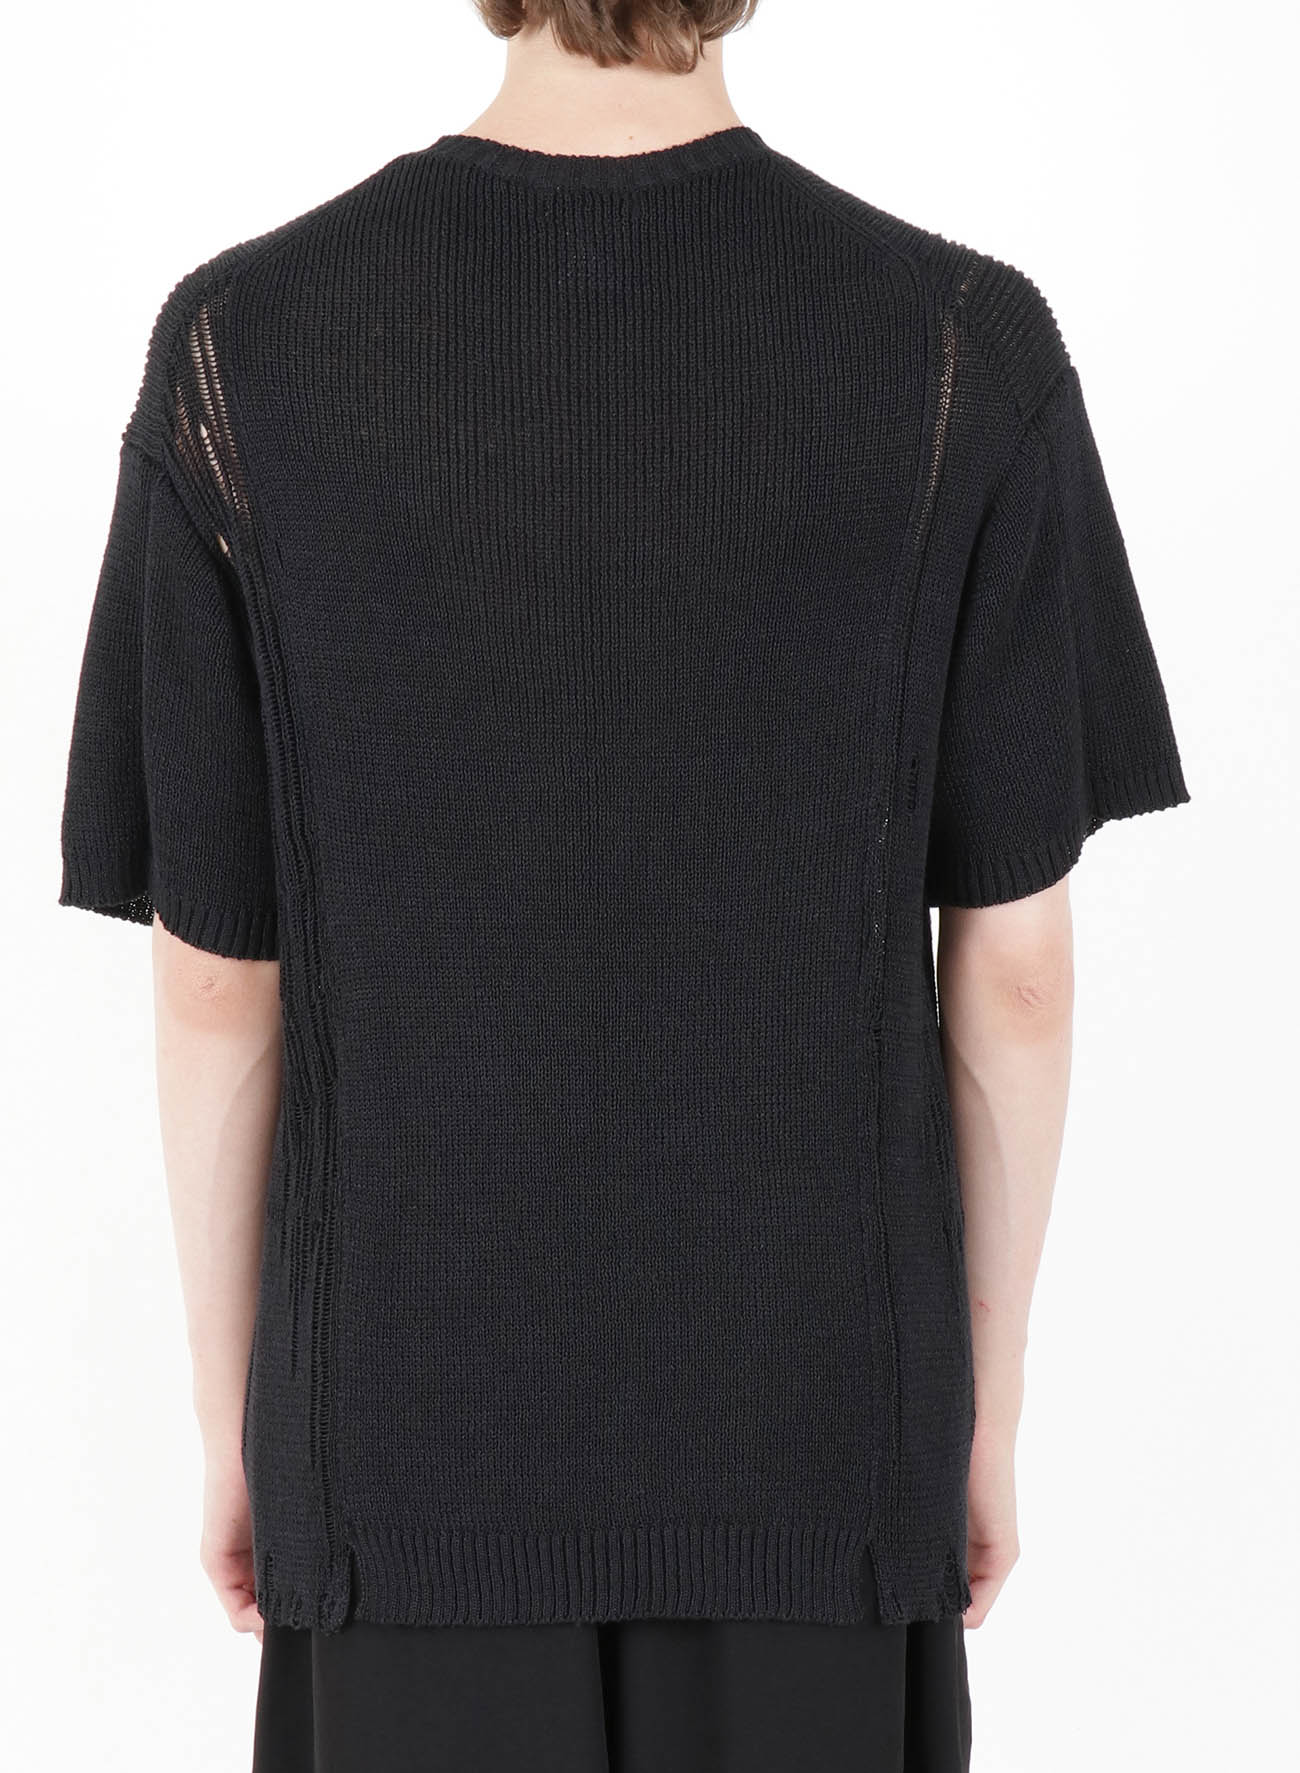 7G RIB + PRINT PATCHED ROUND NECK SHORT SLEEVES